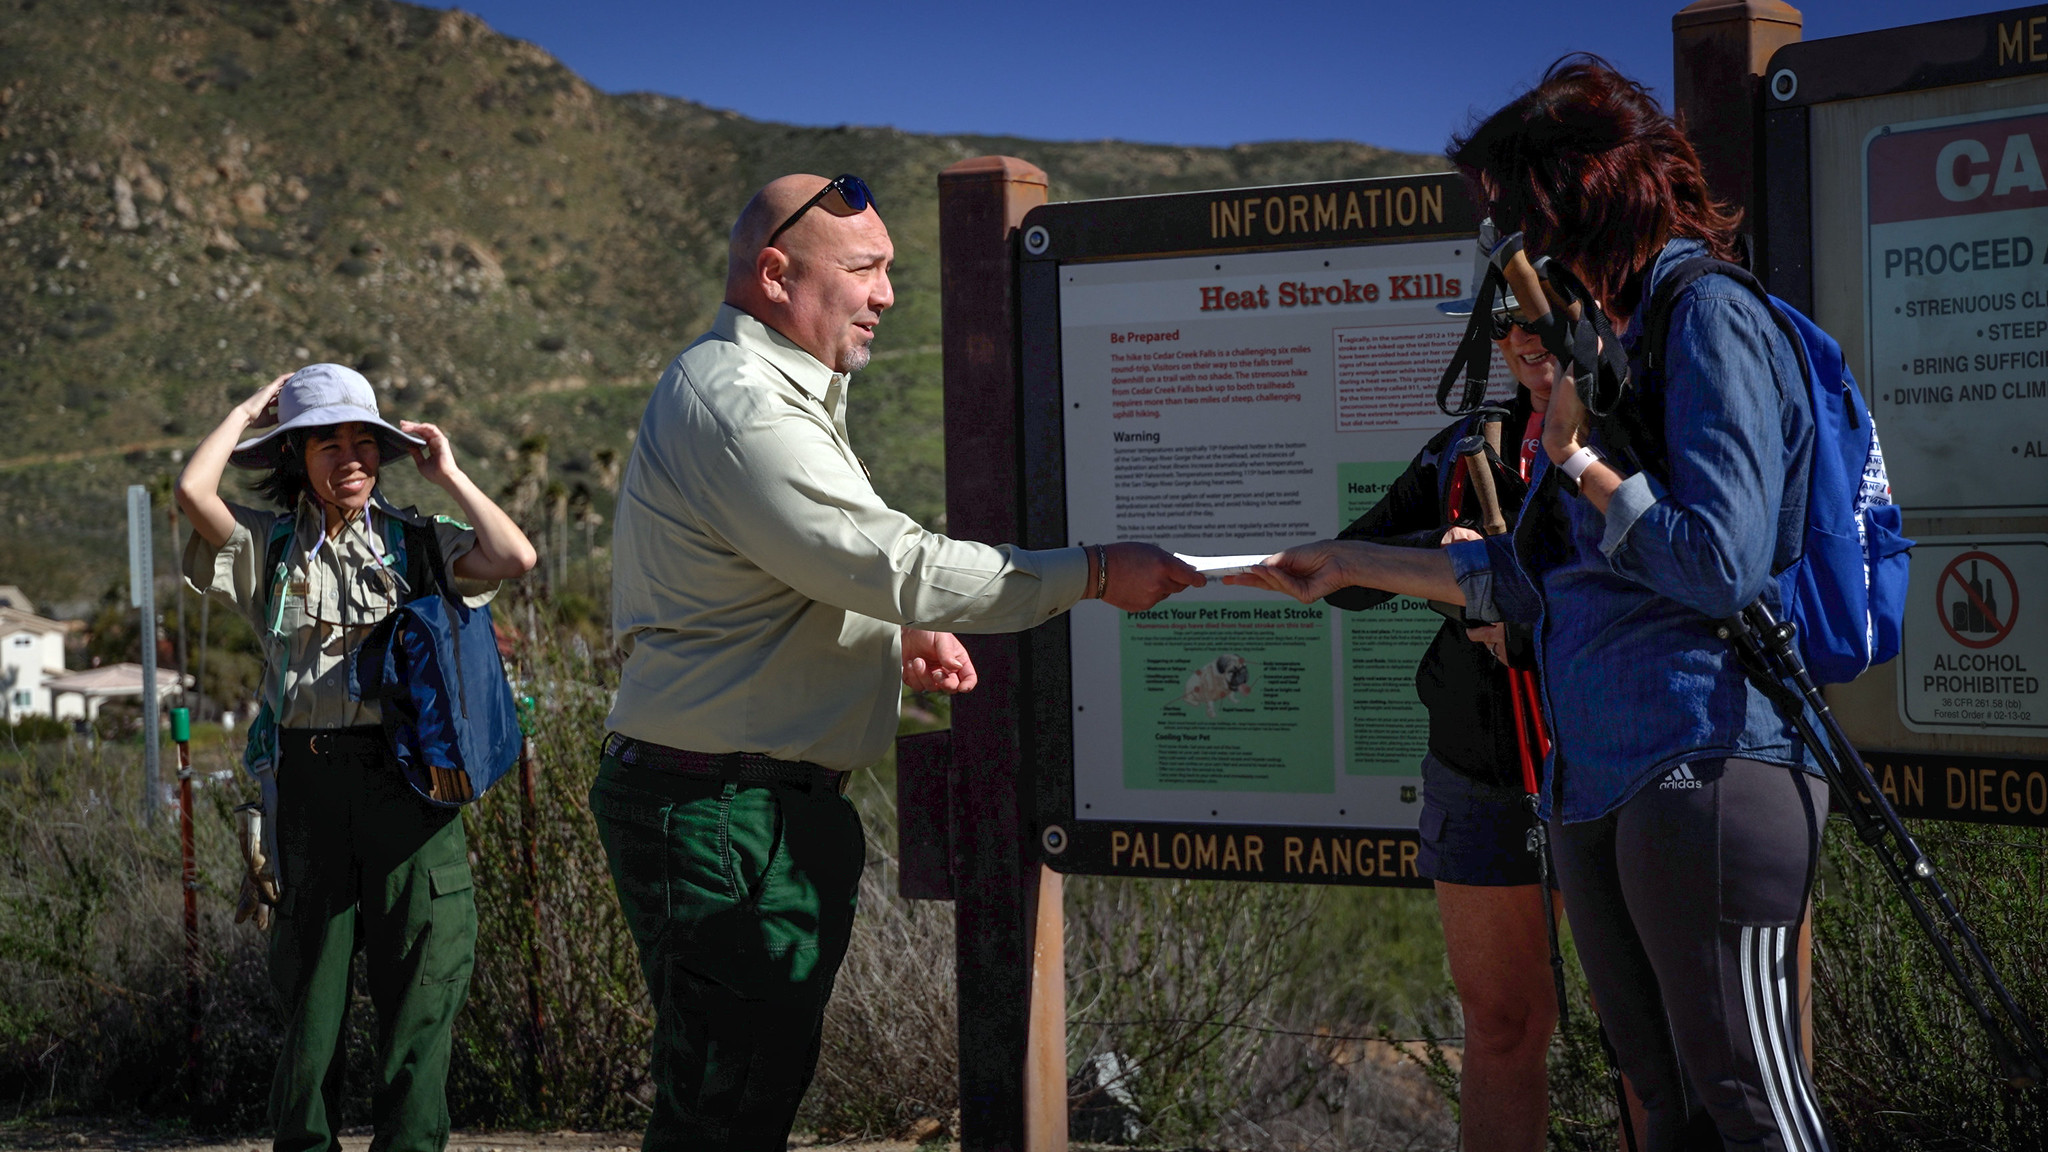 A public affairs officer speaks to 2 hikers at a trailhead. Another employee observes.